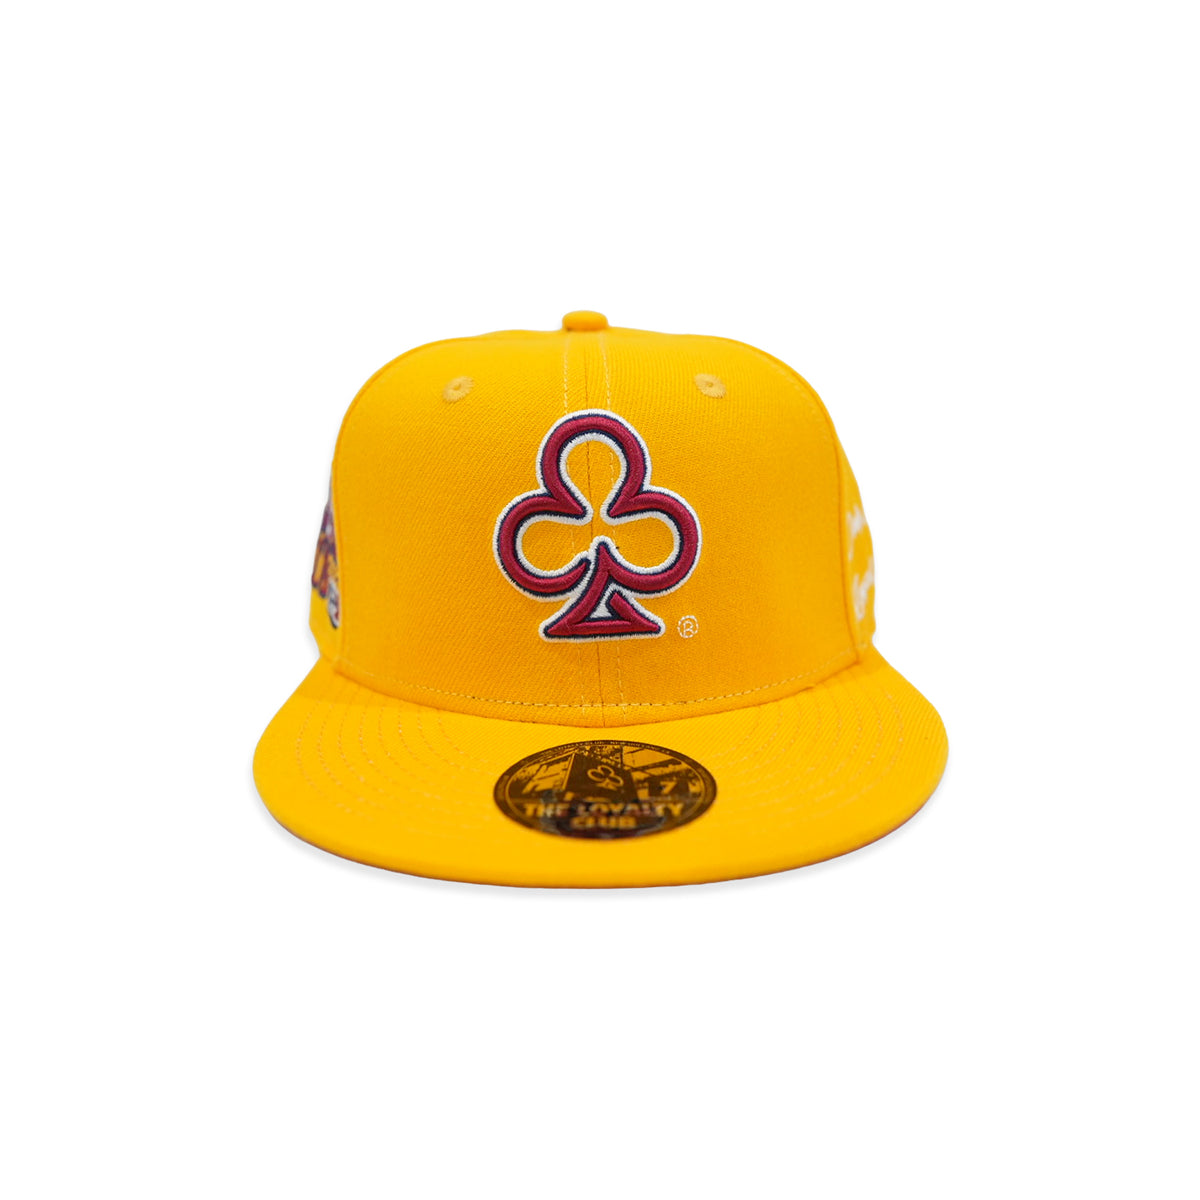 ♣️® LOGO FITTED (YELLOW) – The Loyalty Club